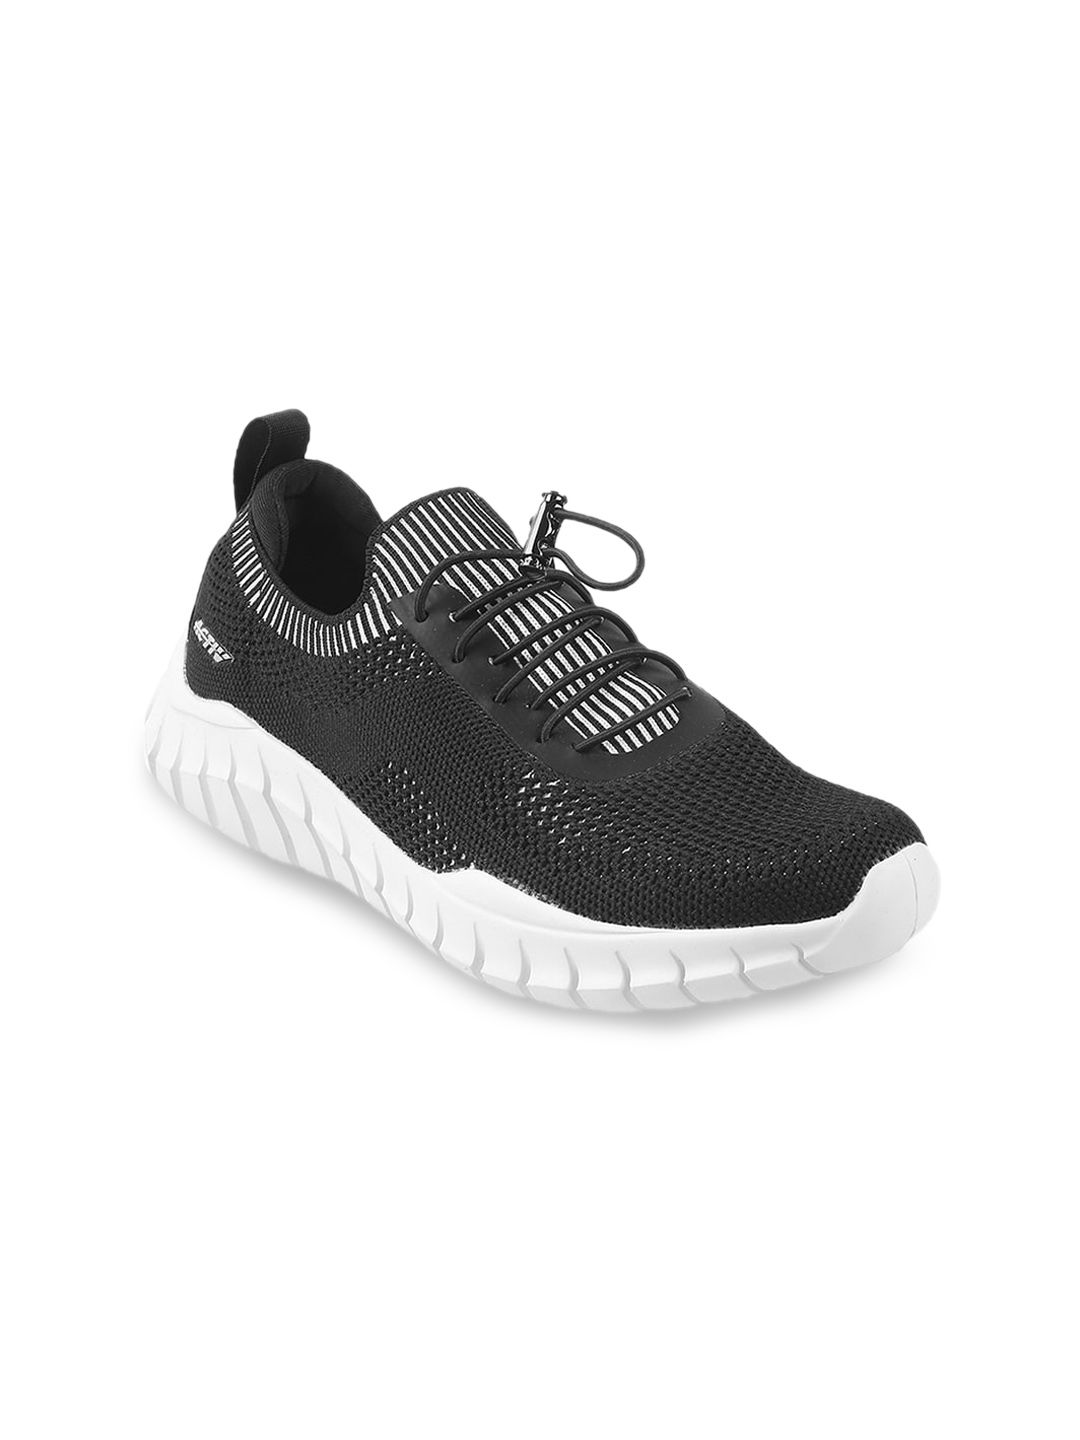 ACTIV Women Woven Design Lace-Up Sneakers Price in India